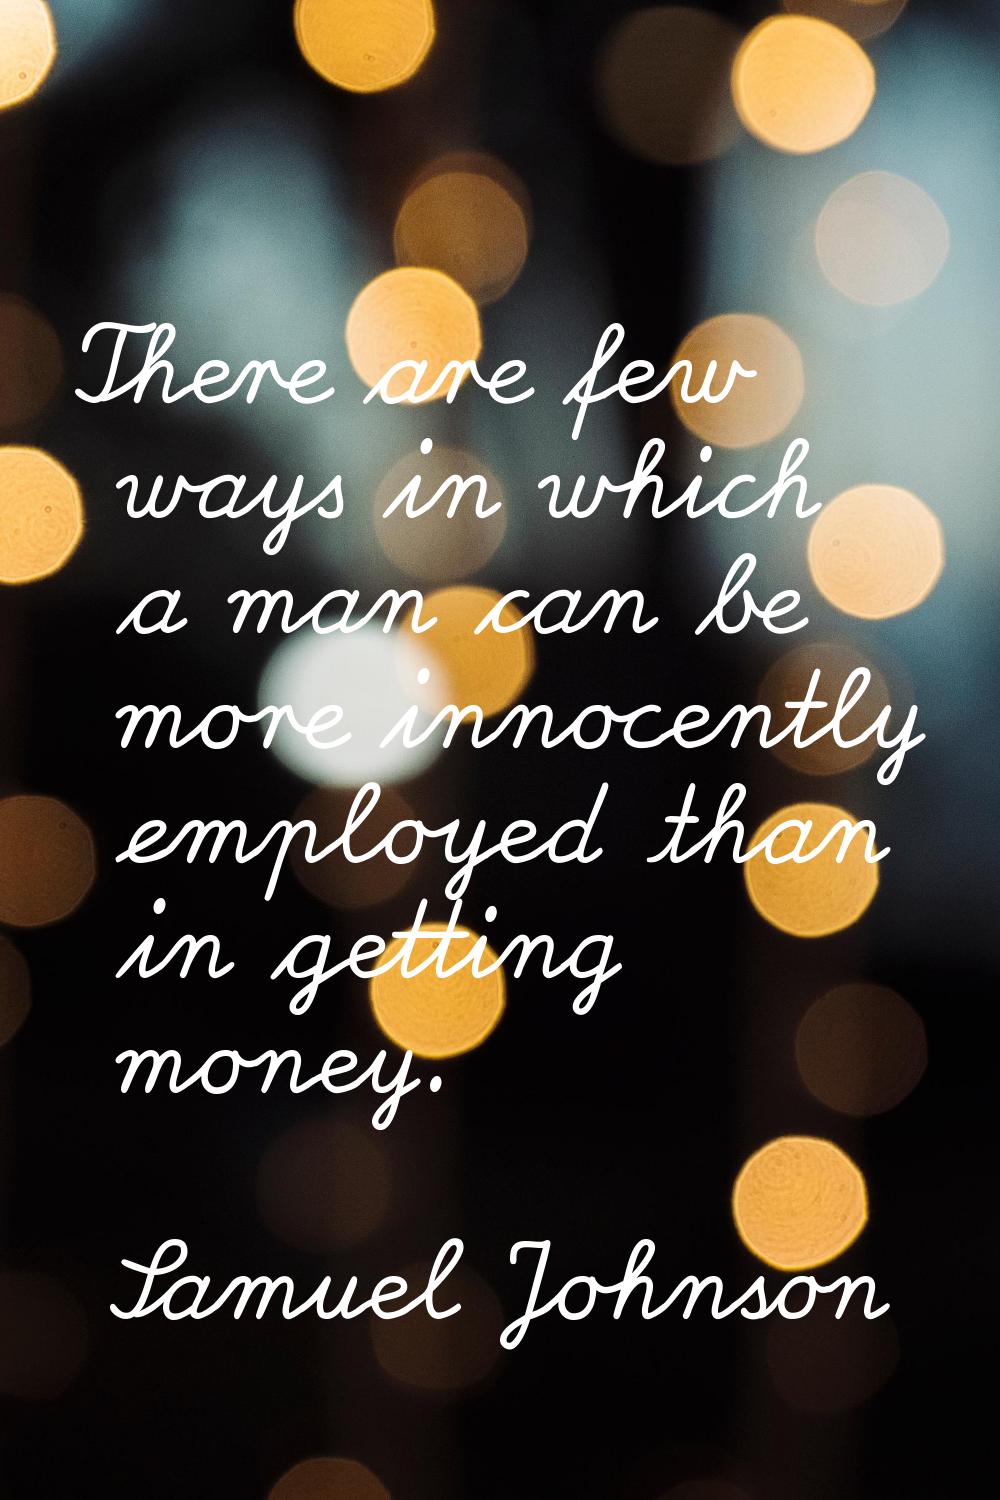 There are few ways in which a man can be more innocently employed than in getting money.